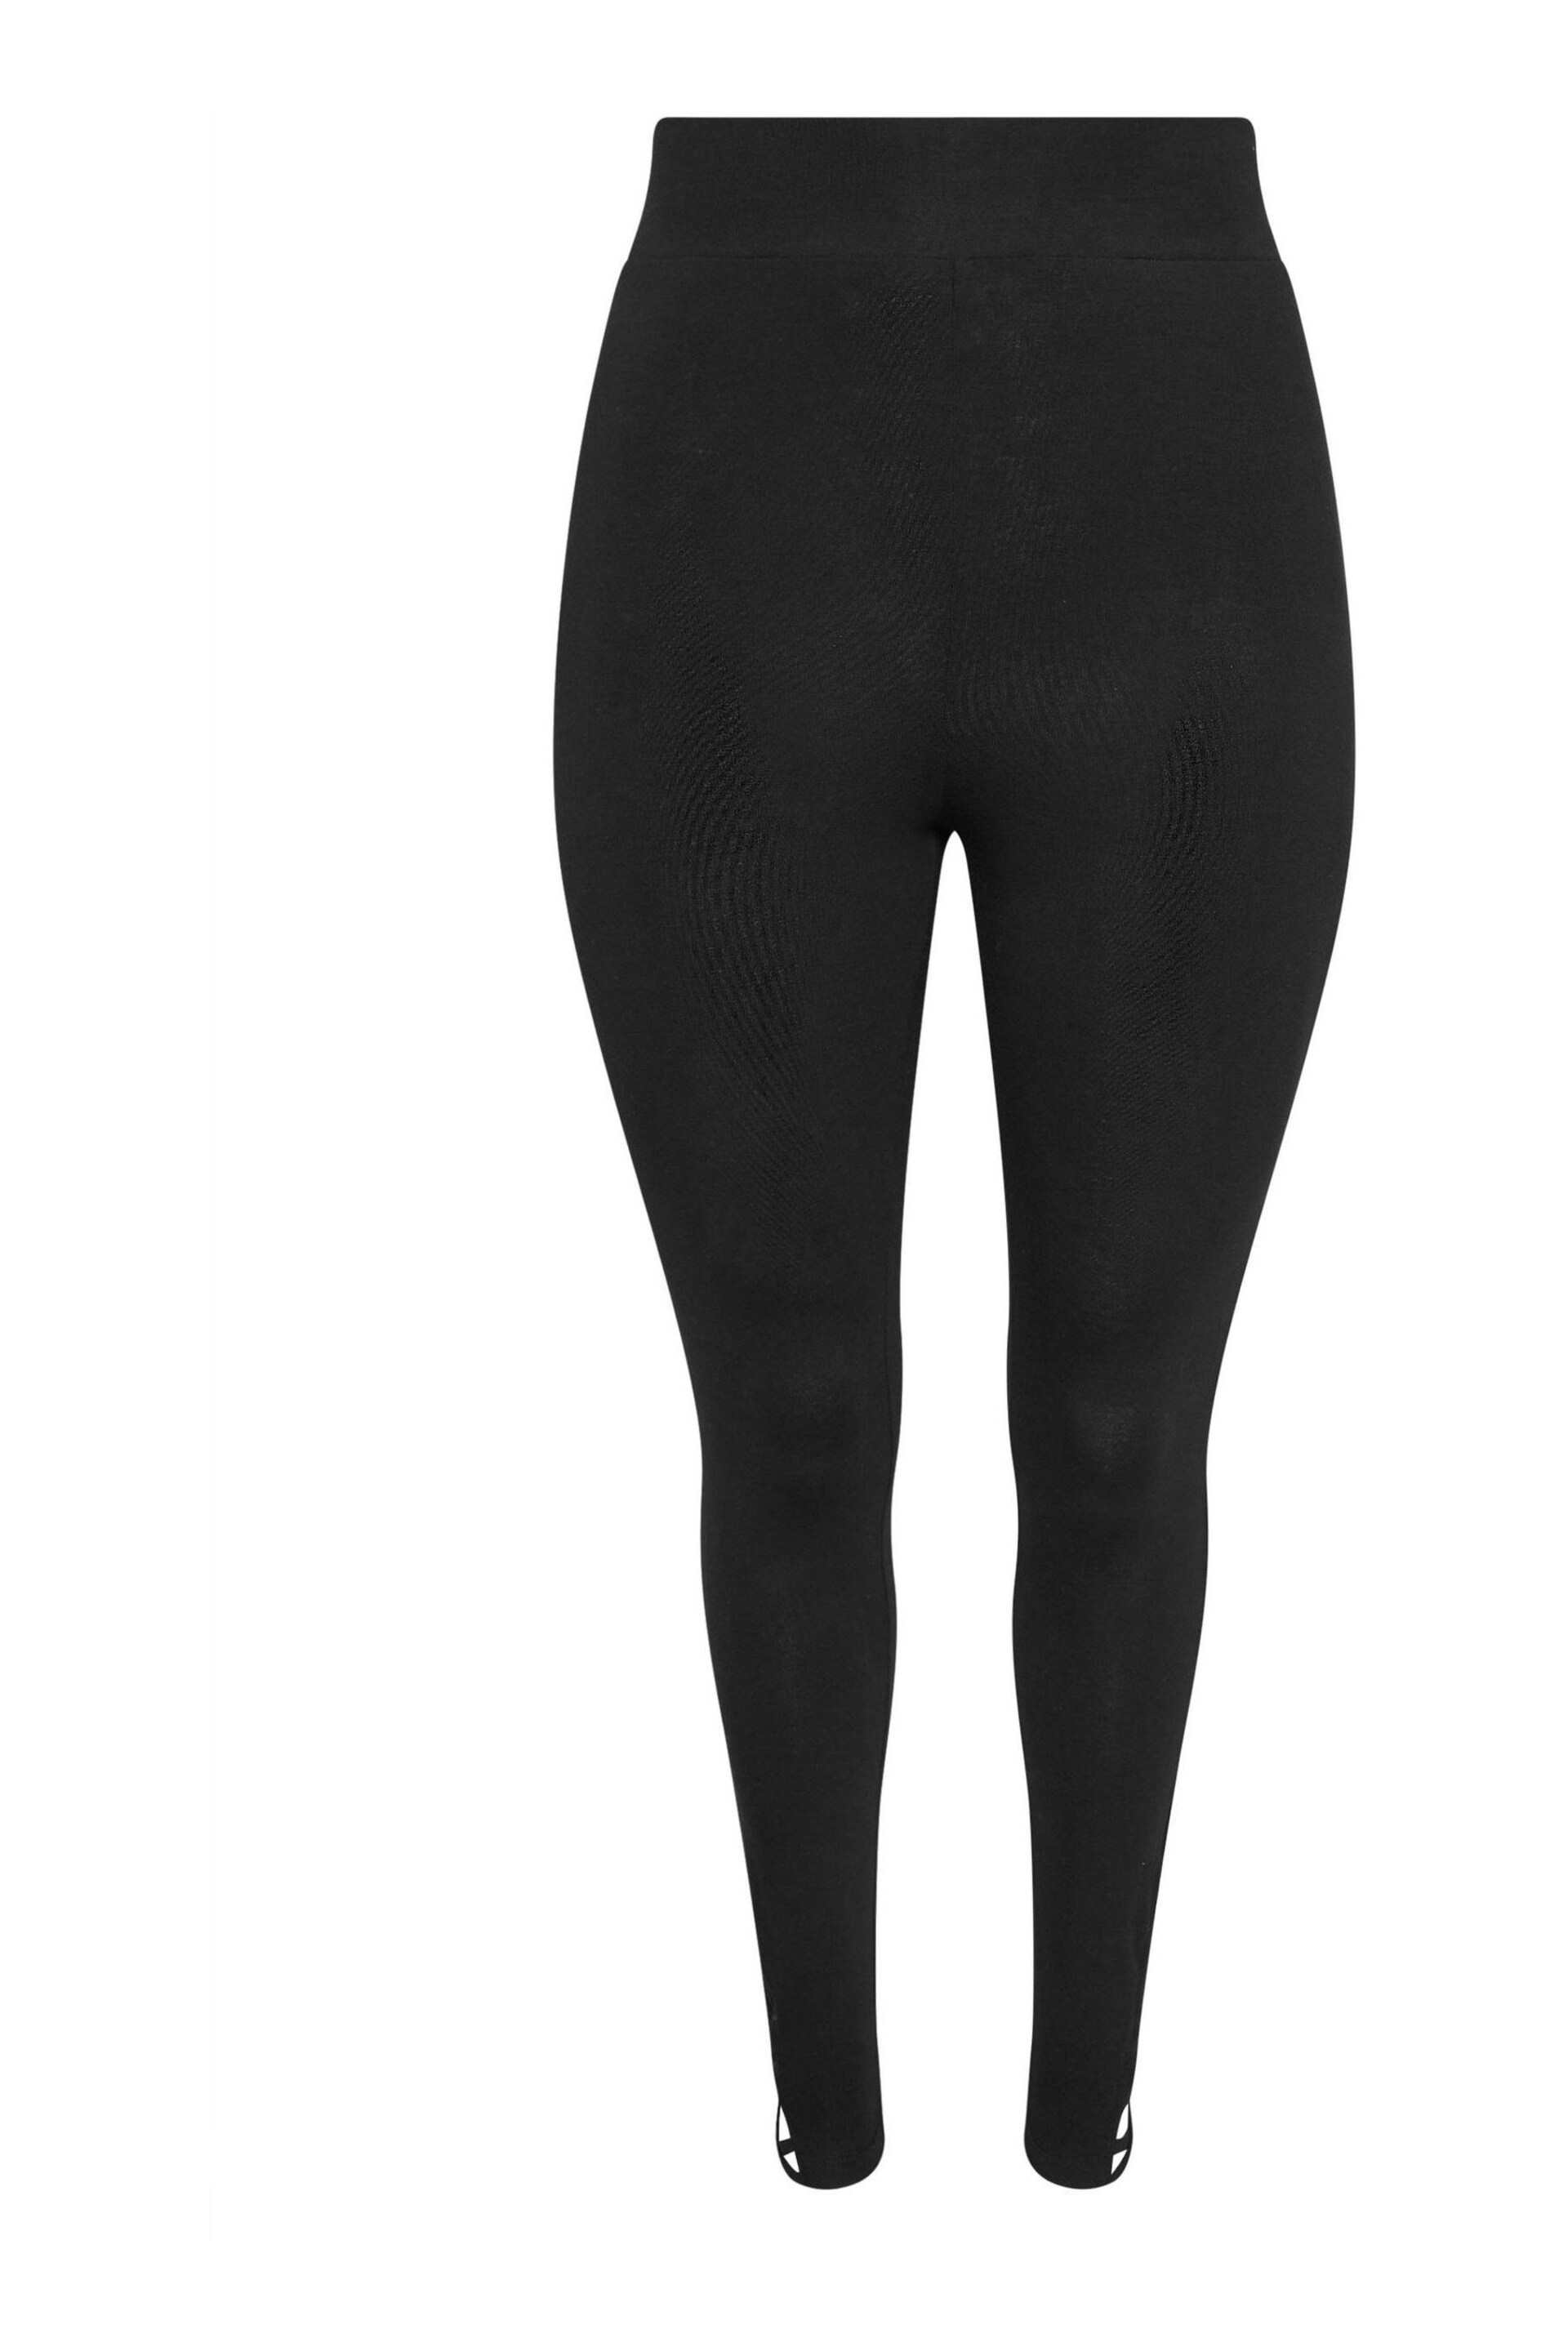 Yours Curve Black Cut Out Leggings - Image 5 of 5